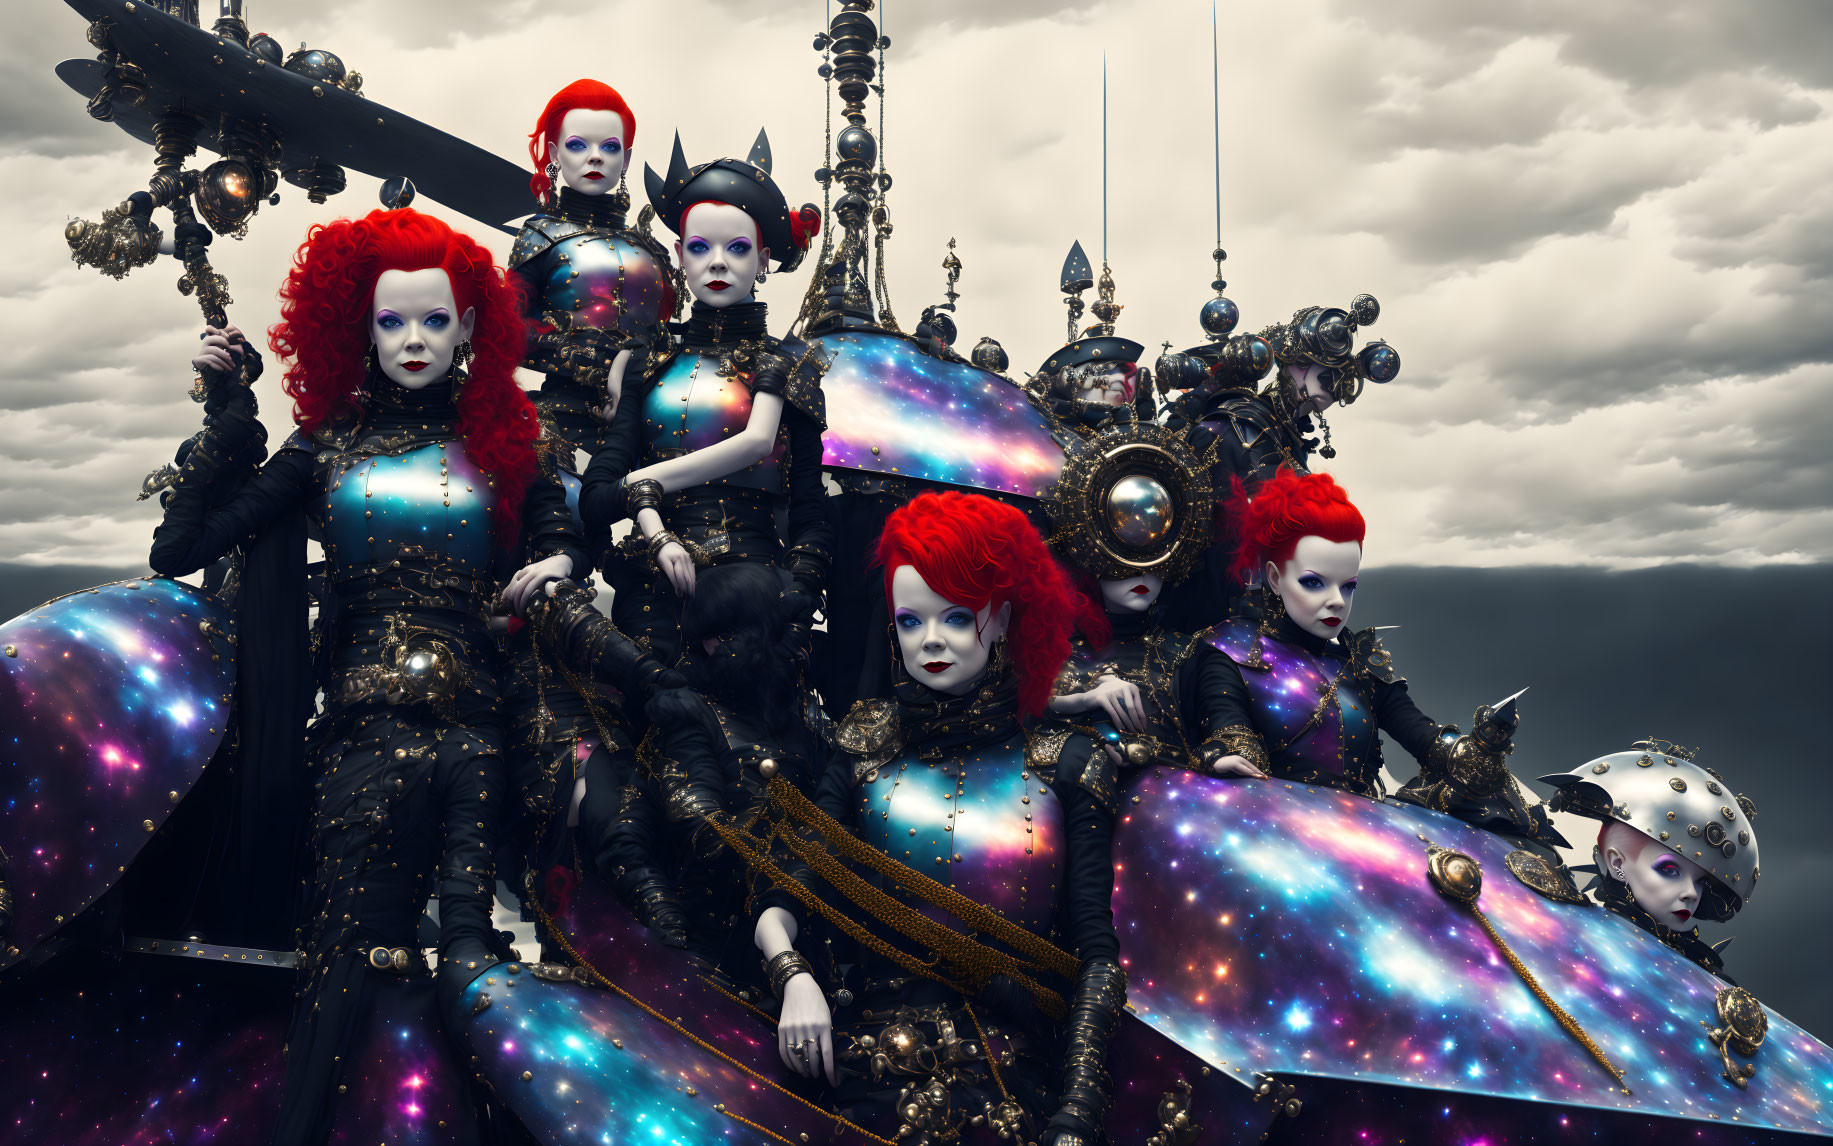 Futuristic space-themed armor makeup against stormy sky